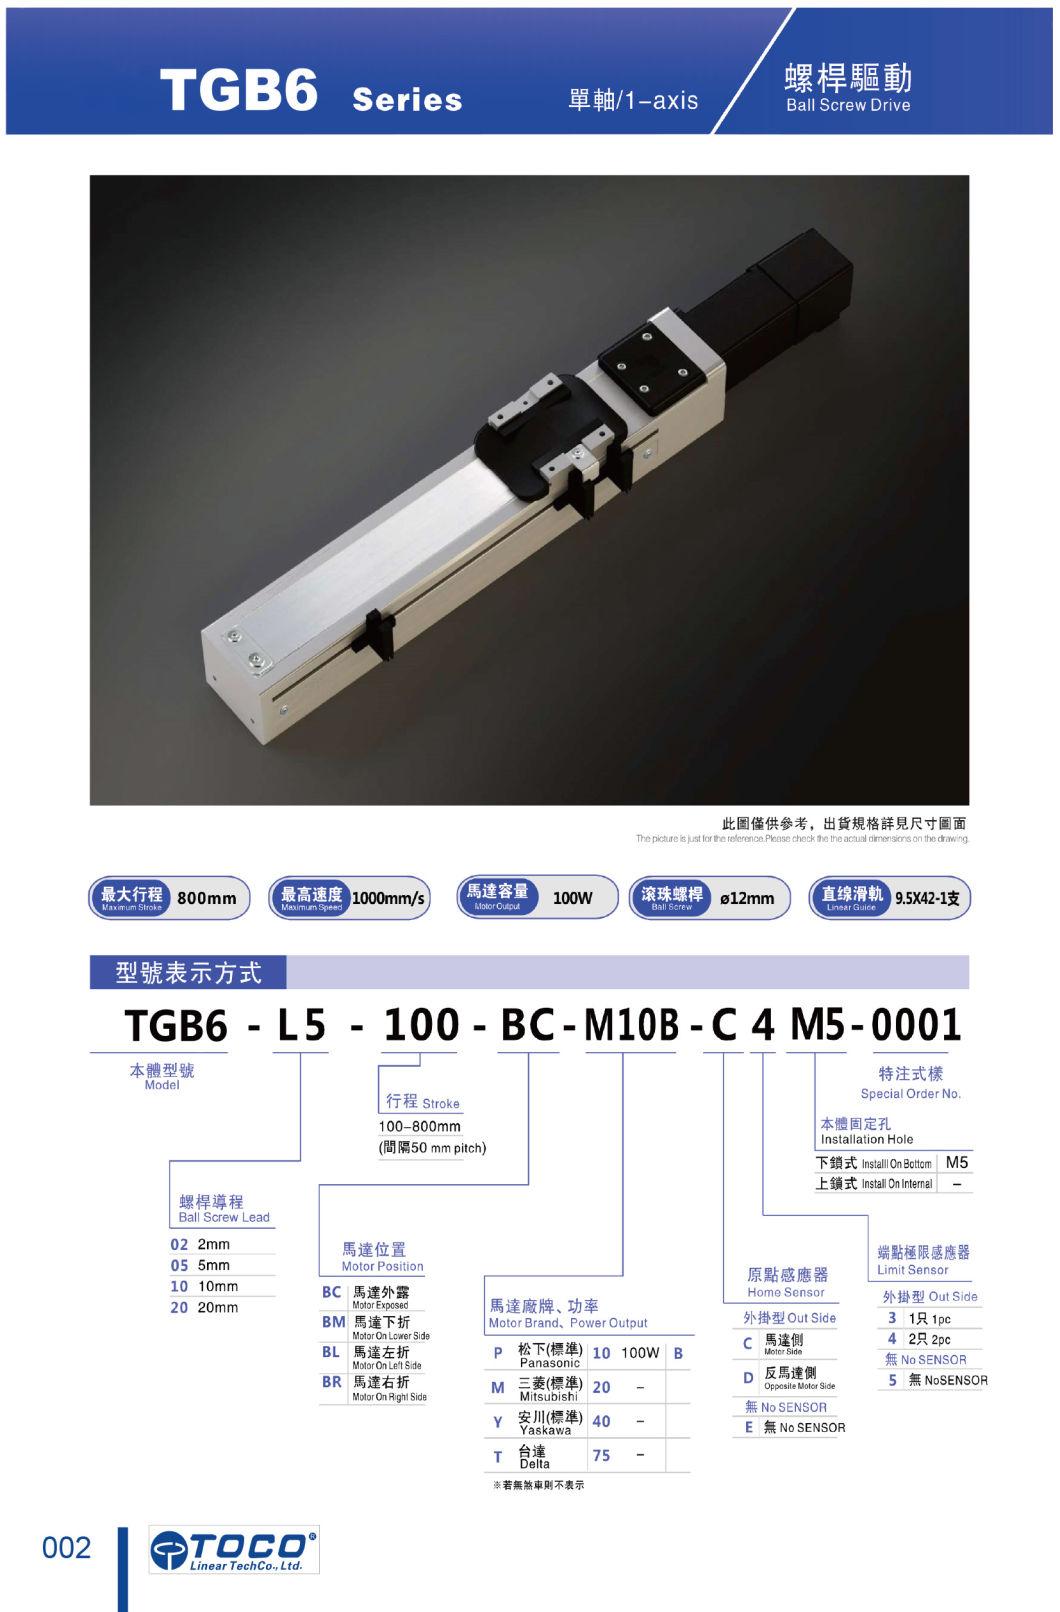 for 3 Axis Xyz Machine Toco Linear Stage Module